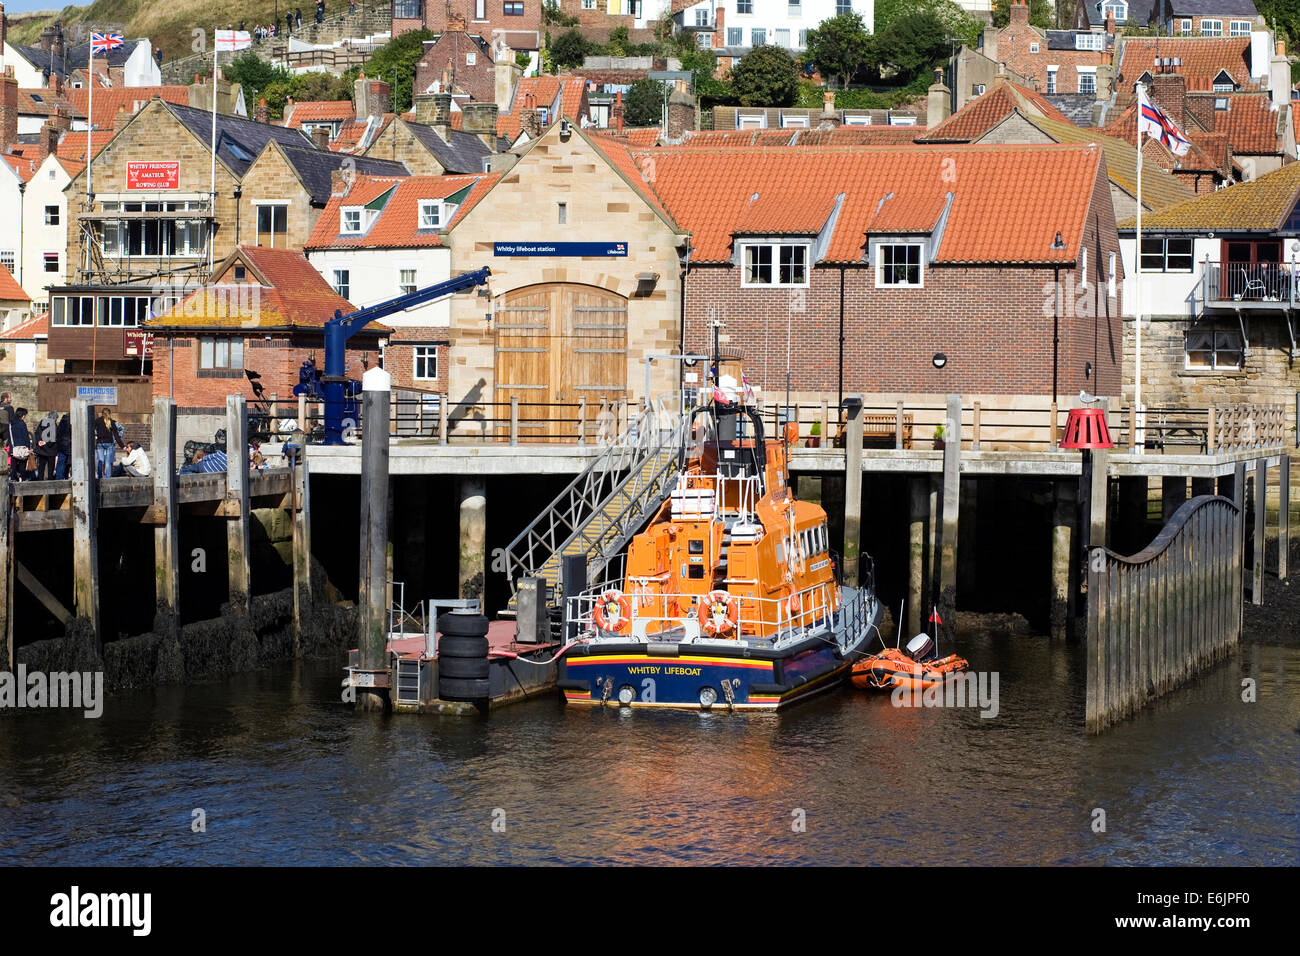 Whitby lifeboat and lifeboat station, North Yorkshire, UK. Stock Photo